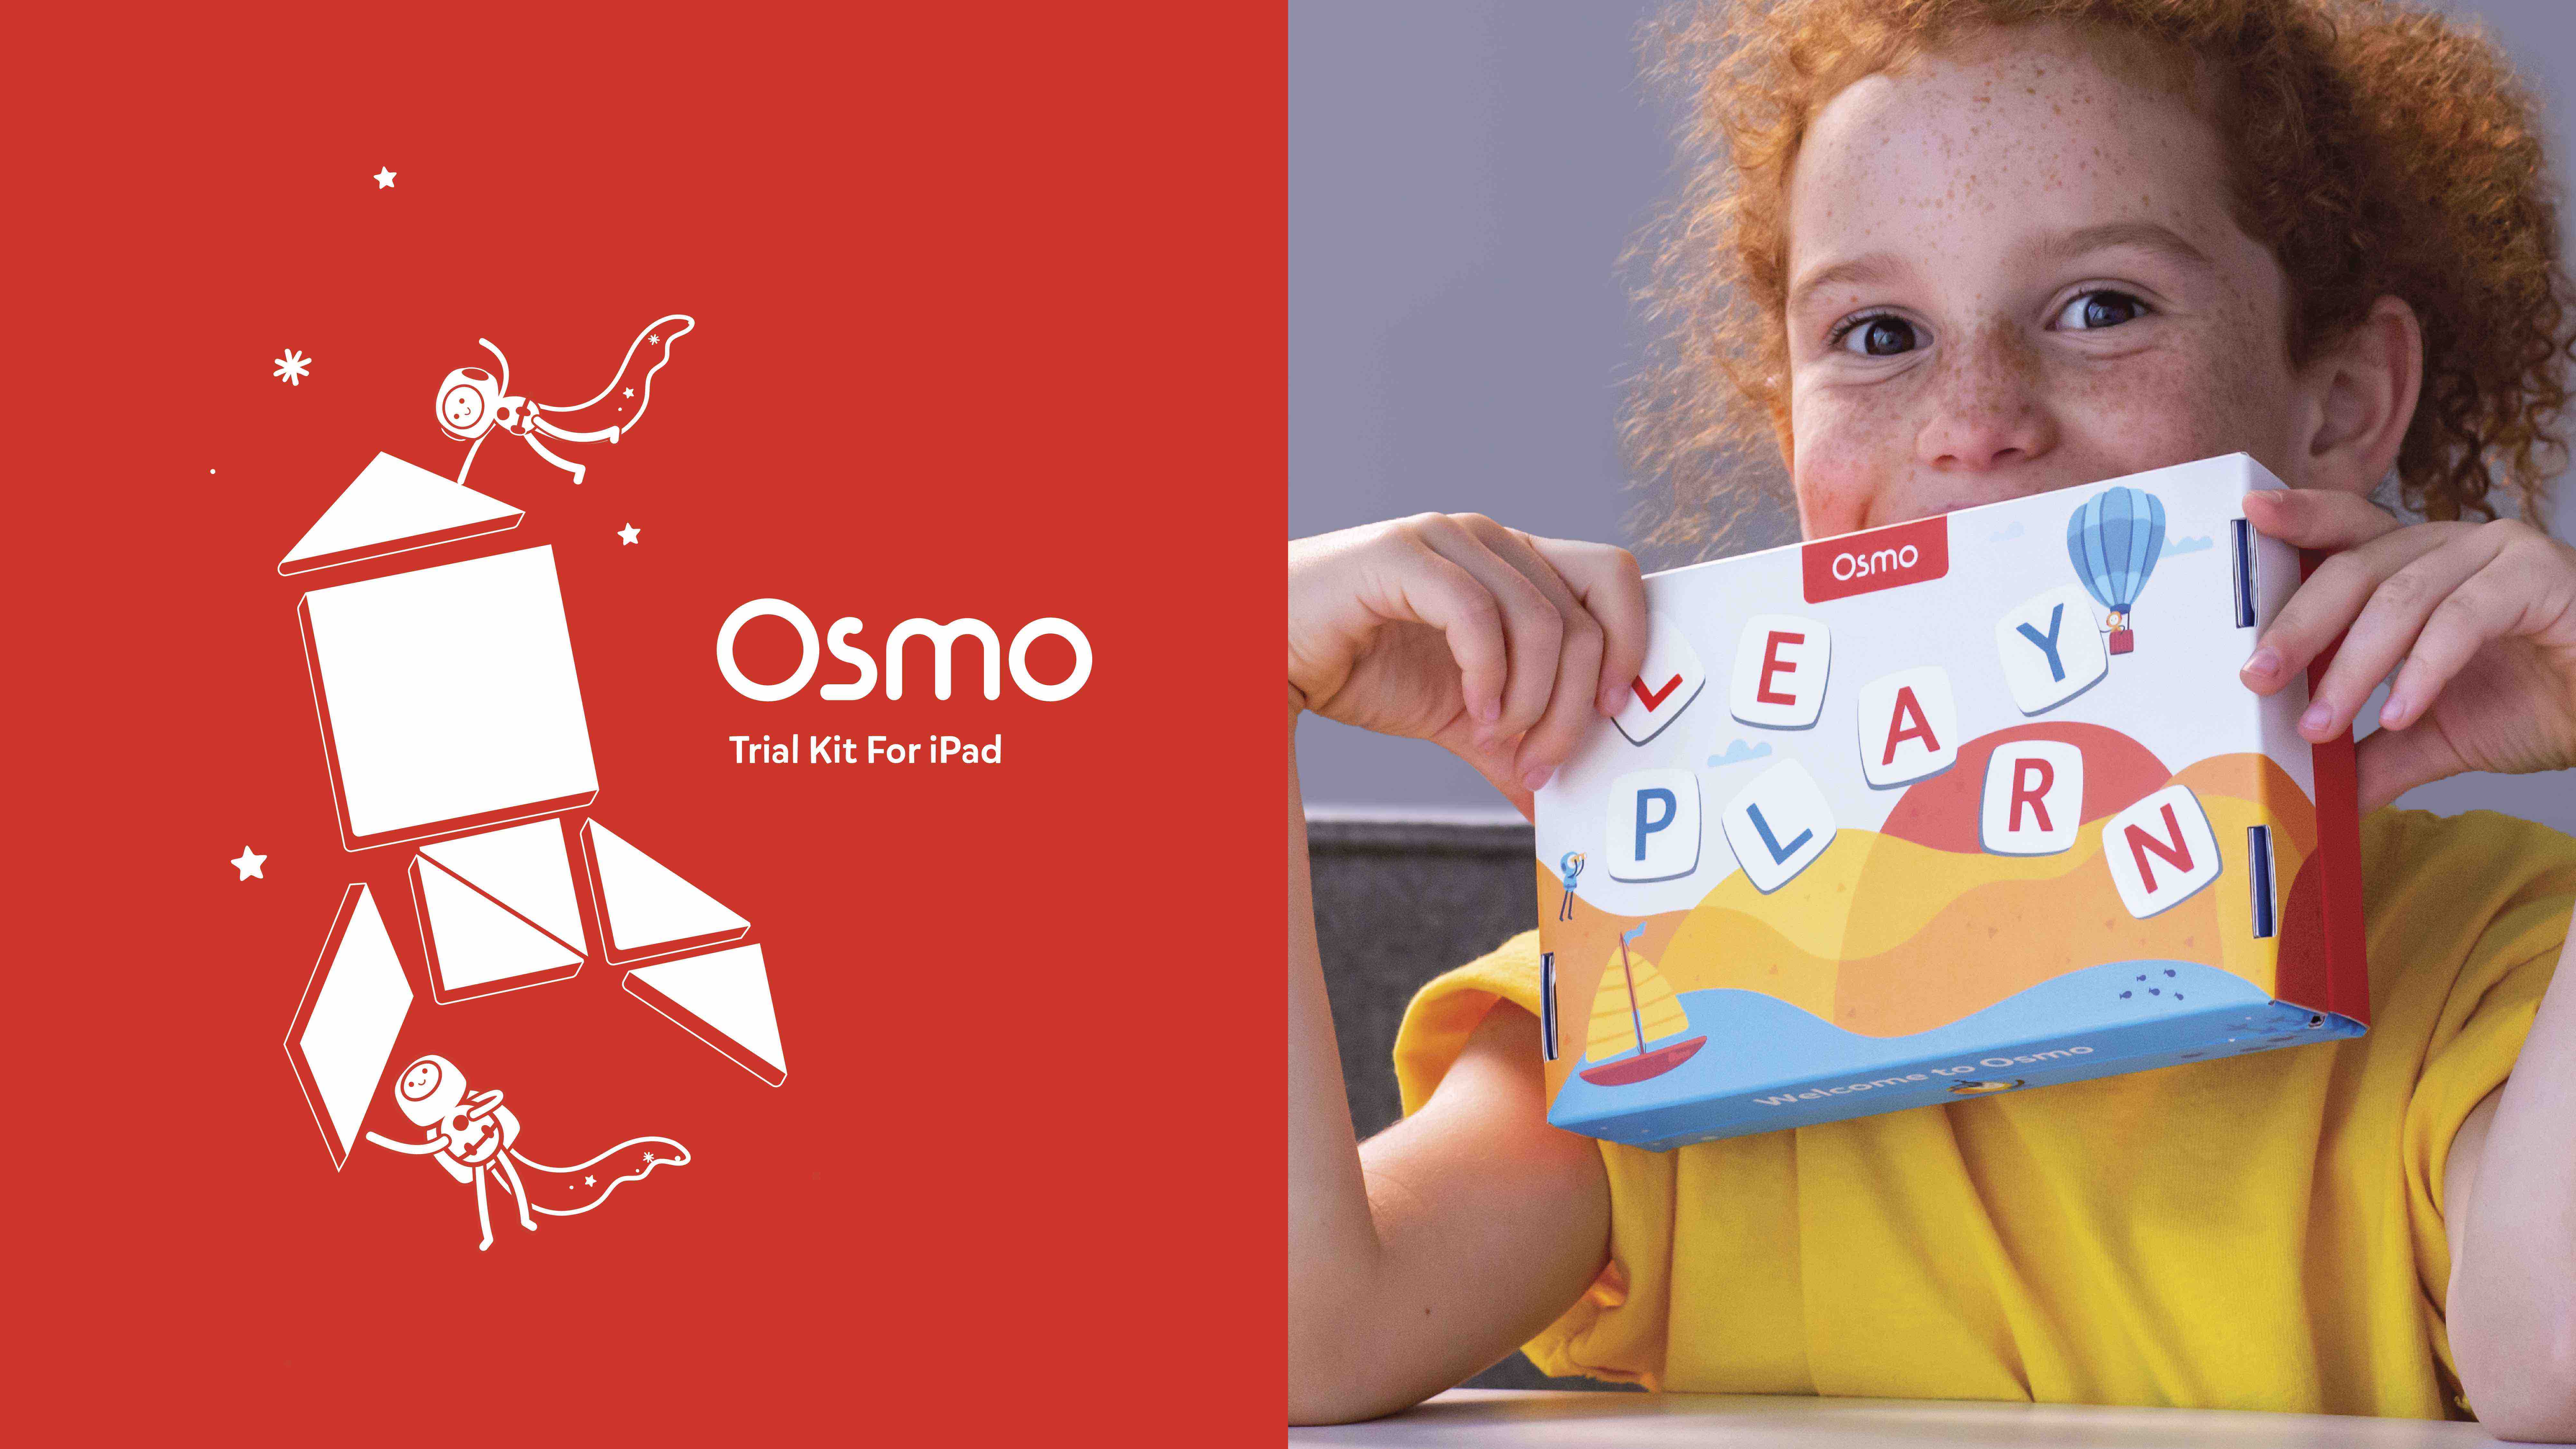 Pearlfisher San Francisco helps Osmo’s hands-on learning take off into a new dimension with a redesigned trial kit